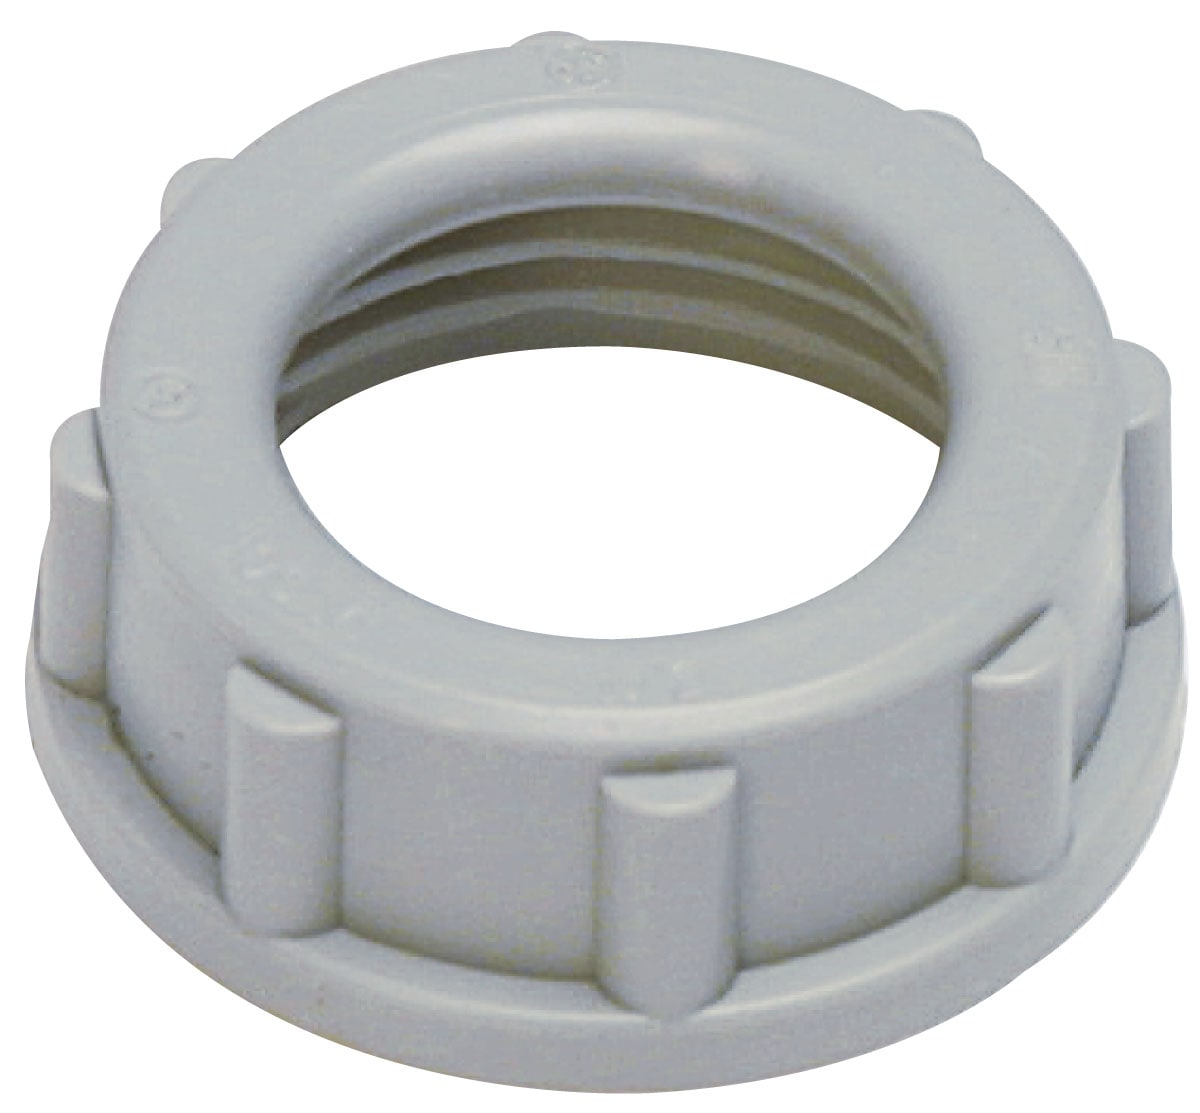 Square Plastic Conduit, Sinopro - Sourcing Industrial Products